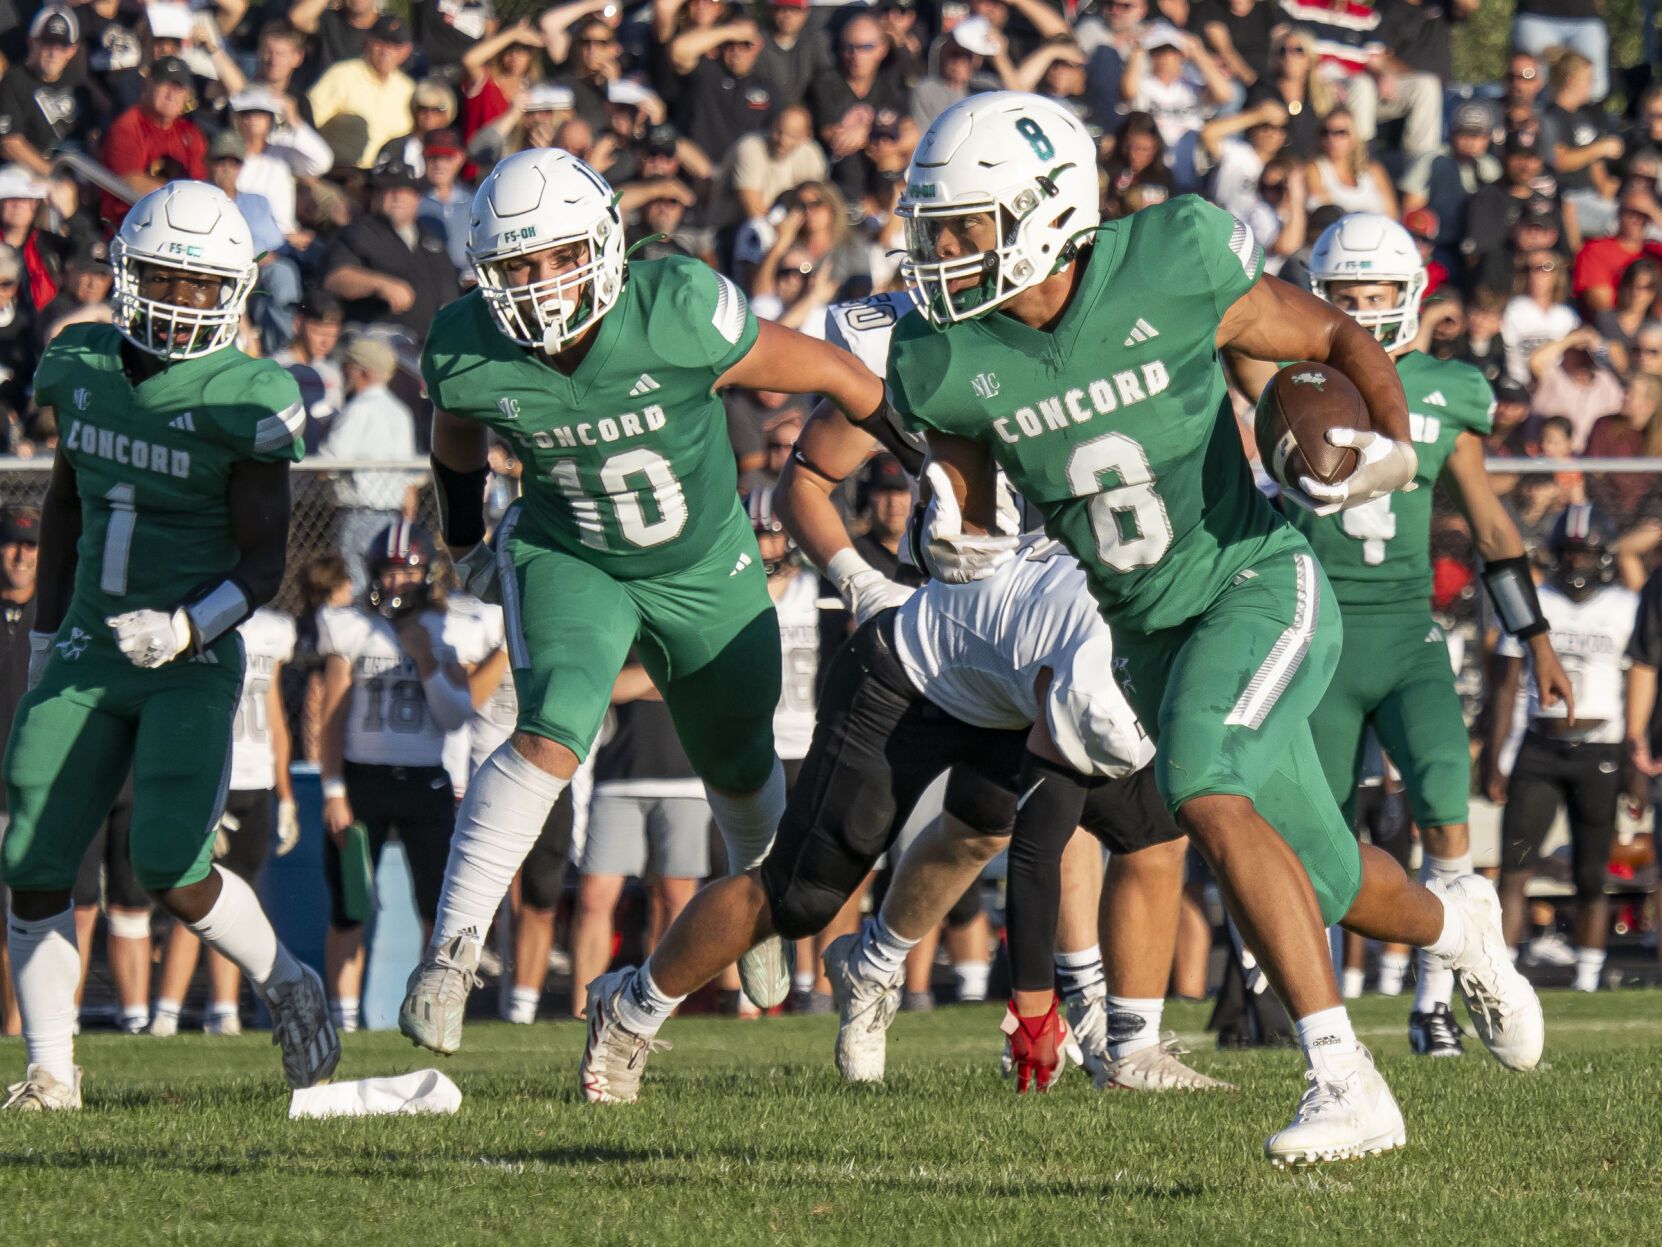 Exciting High School Football Matchups Headline Week 7 in the TGN Area